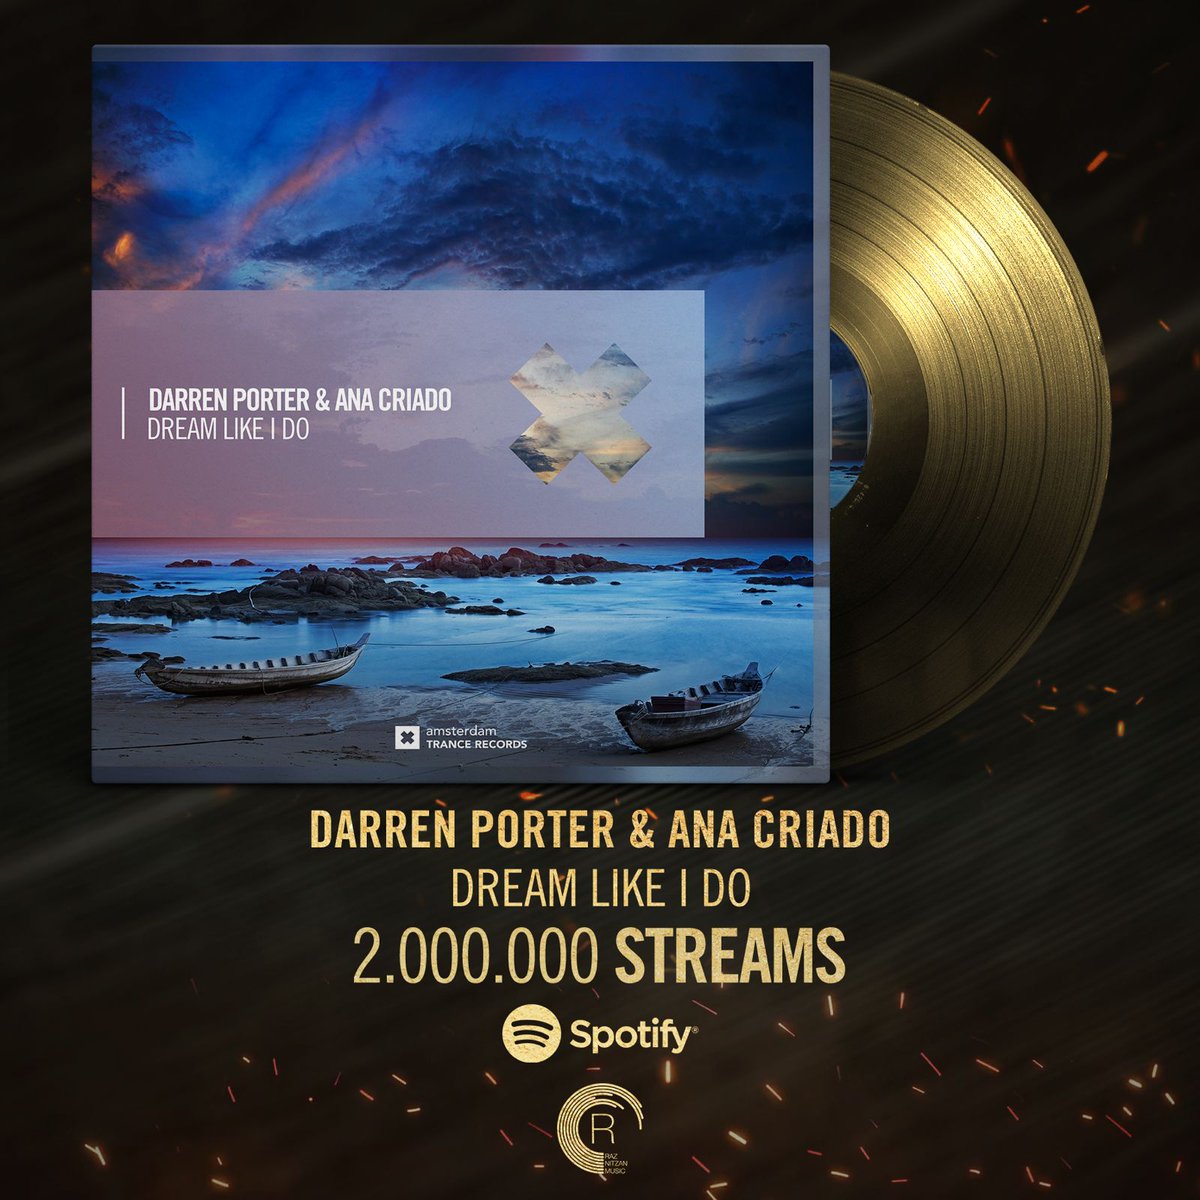 2 Million @Spotify streams!!! Well done @Darren_Porter @AnaCriadoMusic @AmsterdamTrance 🙌 and Thank you all!!! 💟 @spotifyartists open.spotify.com/track/4ZruxHVw…